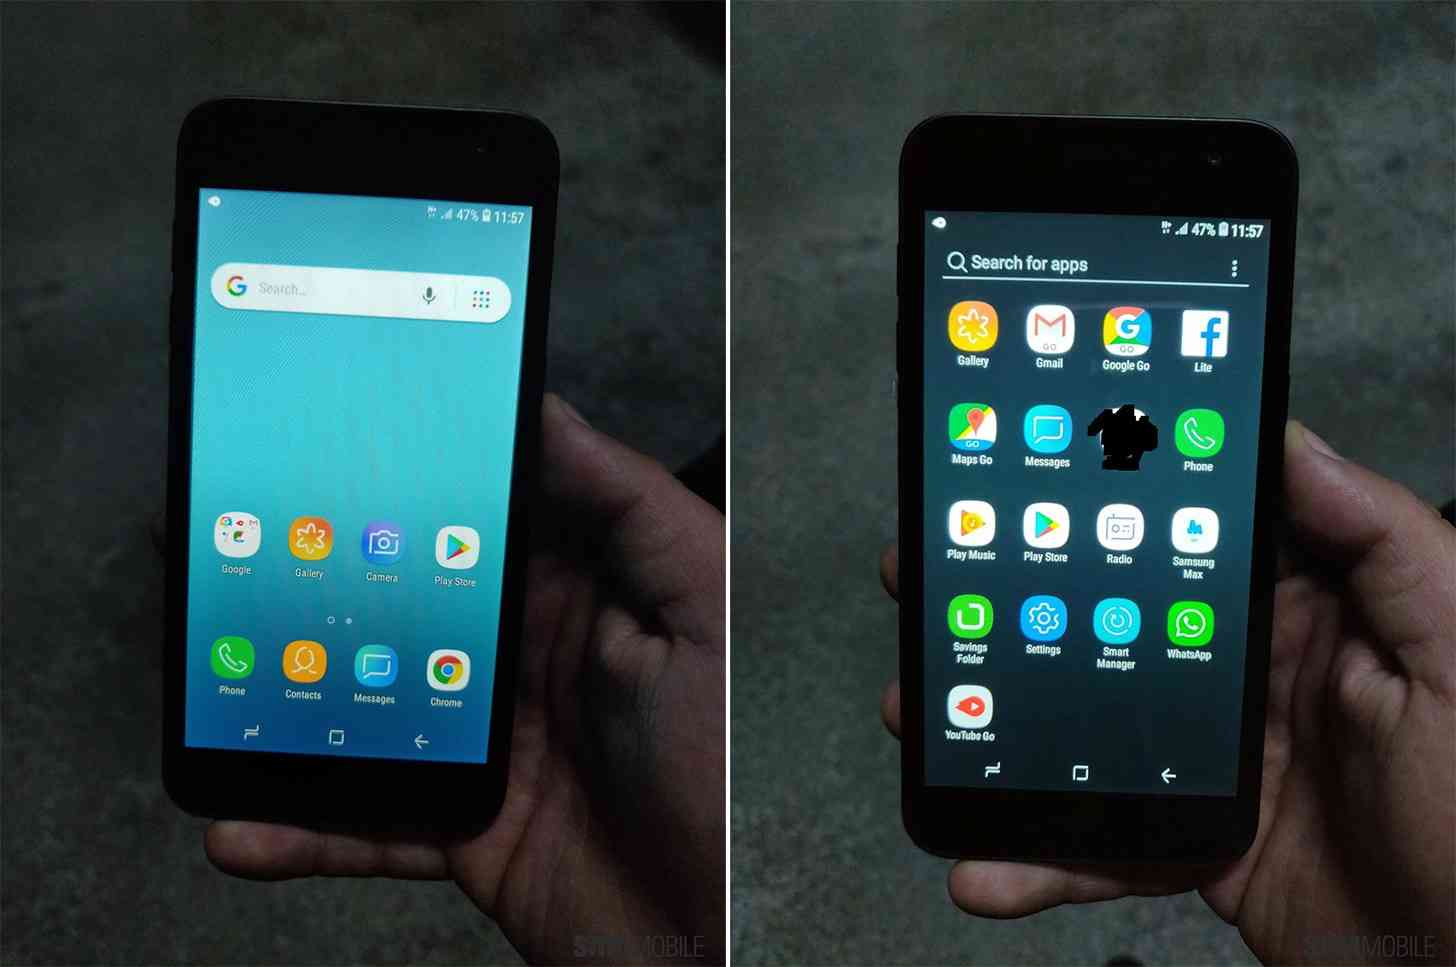 Samsung Android Go Galaxy J2 Core hands-on photos leak